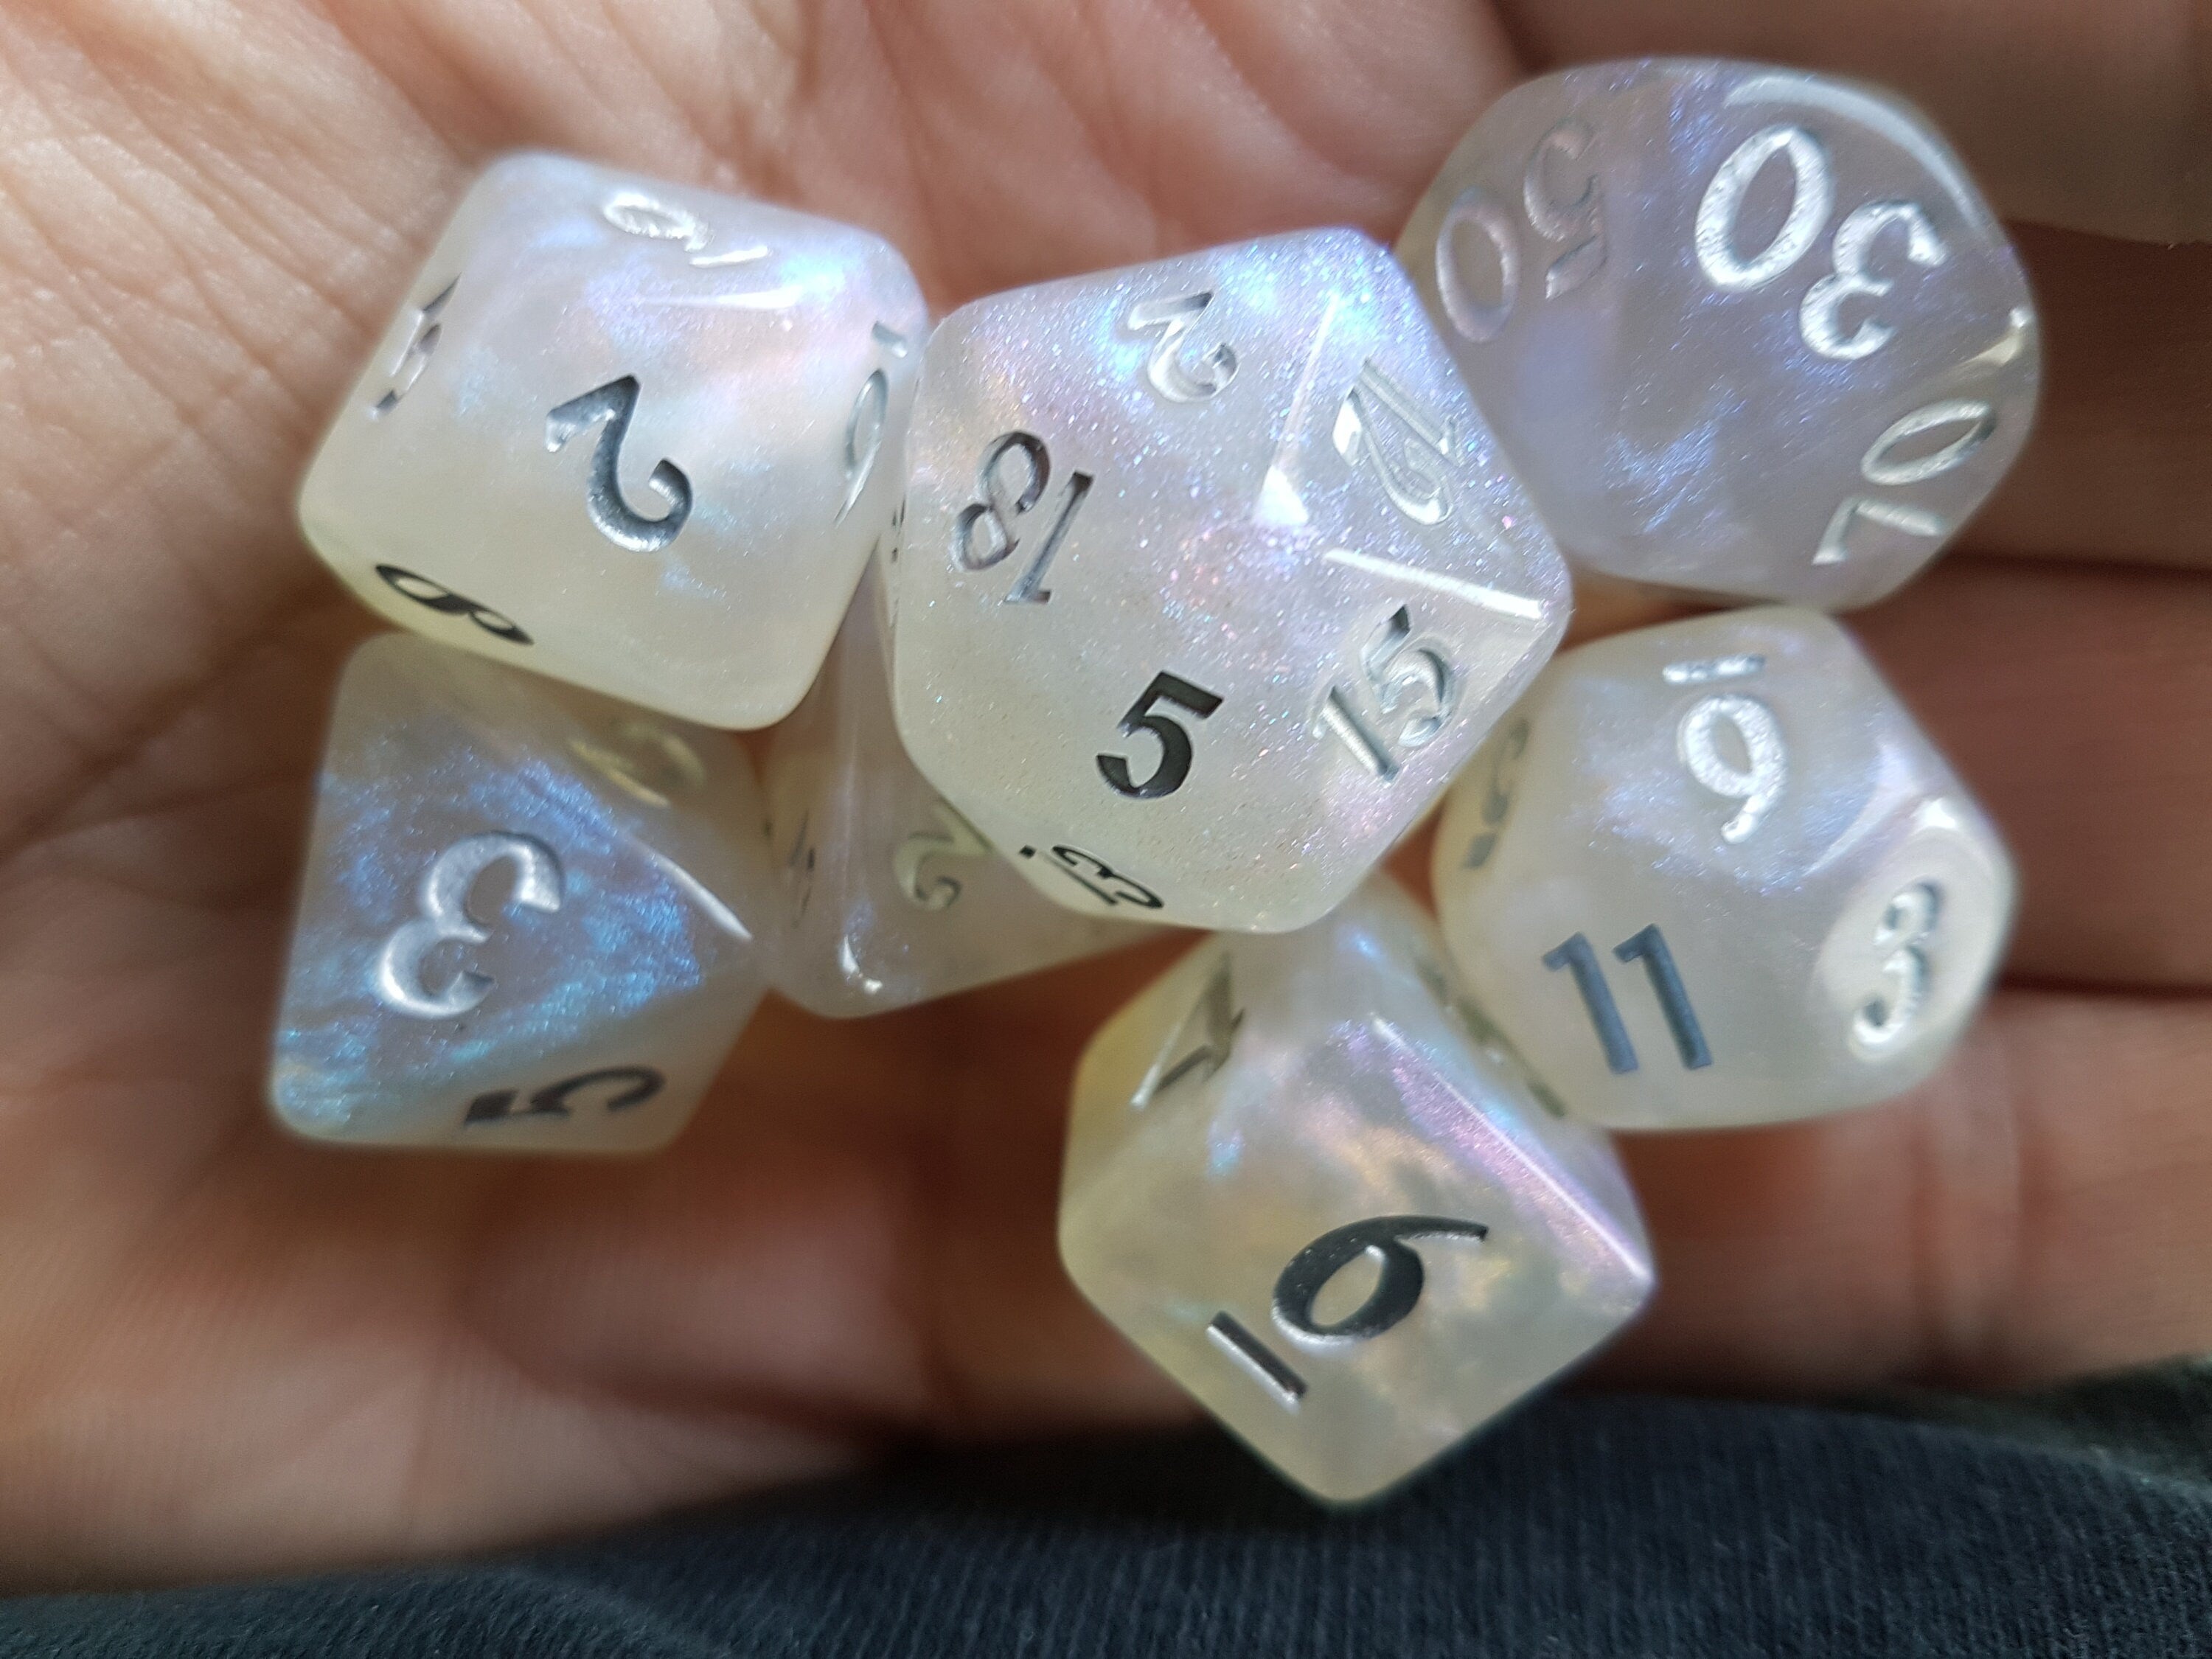 Patience dice box and Divine Radiance dice set